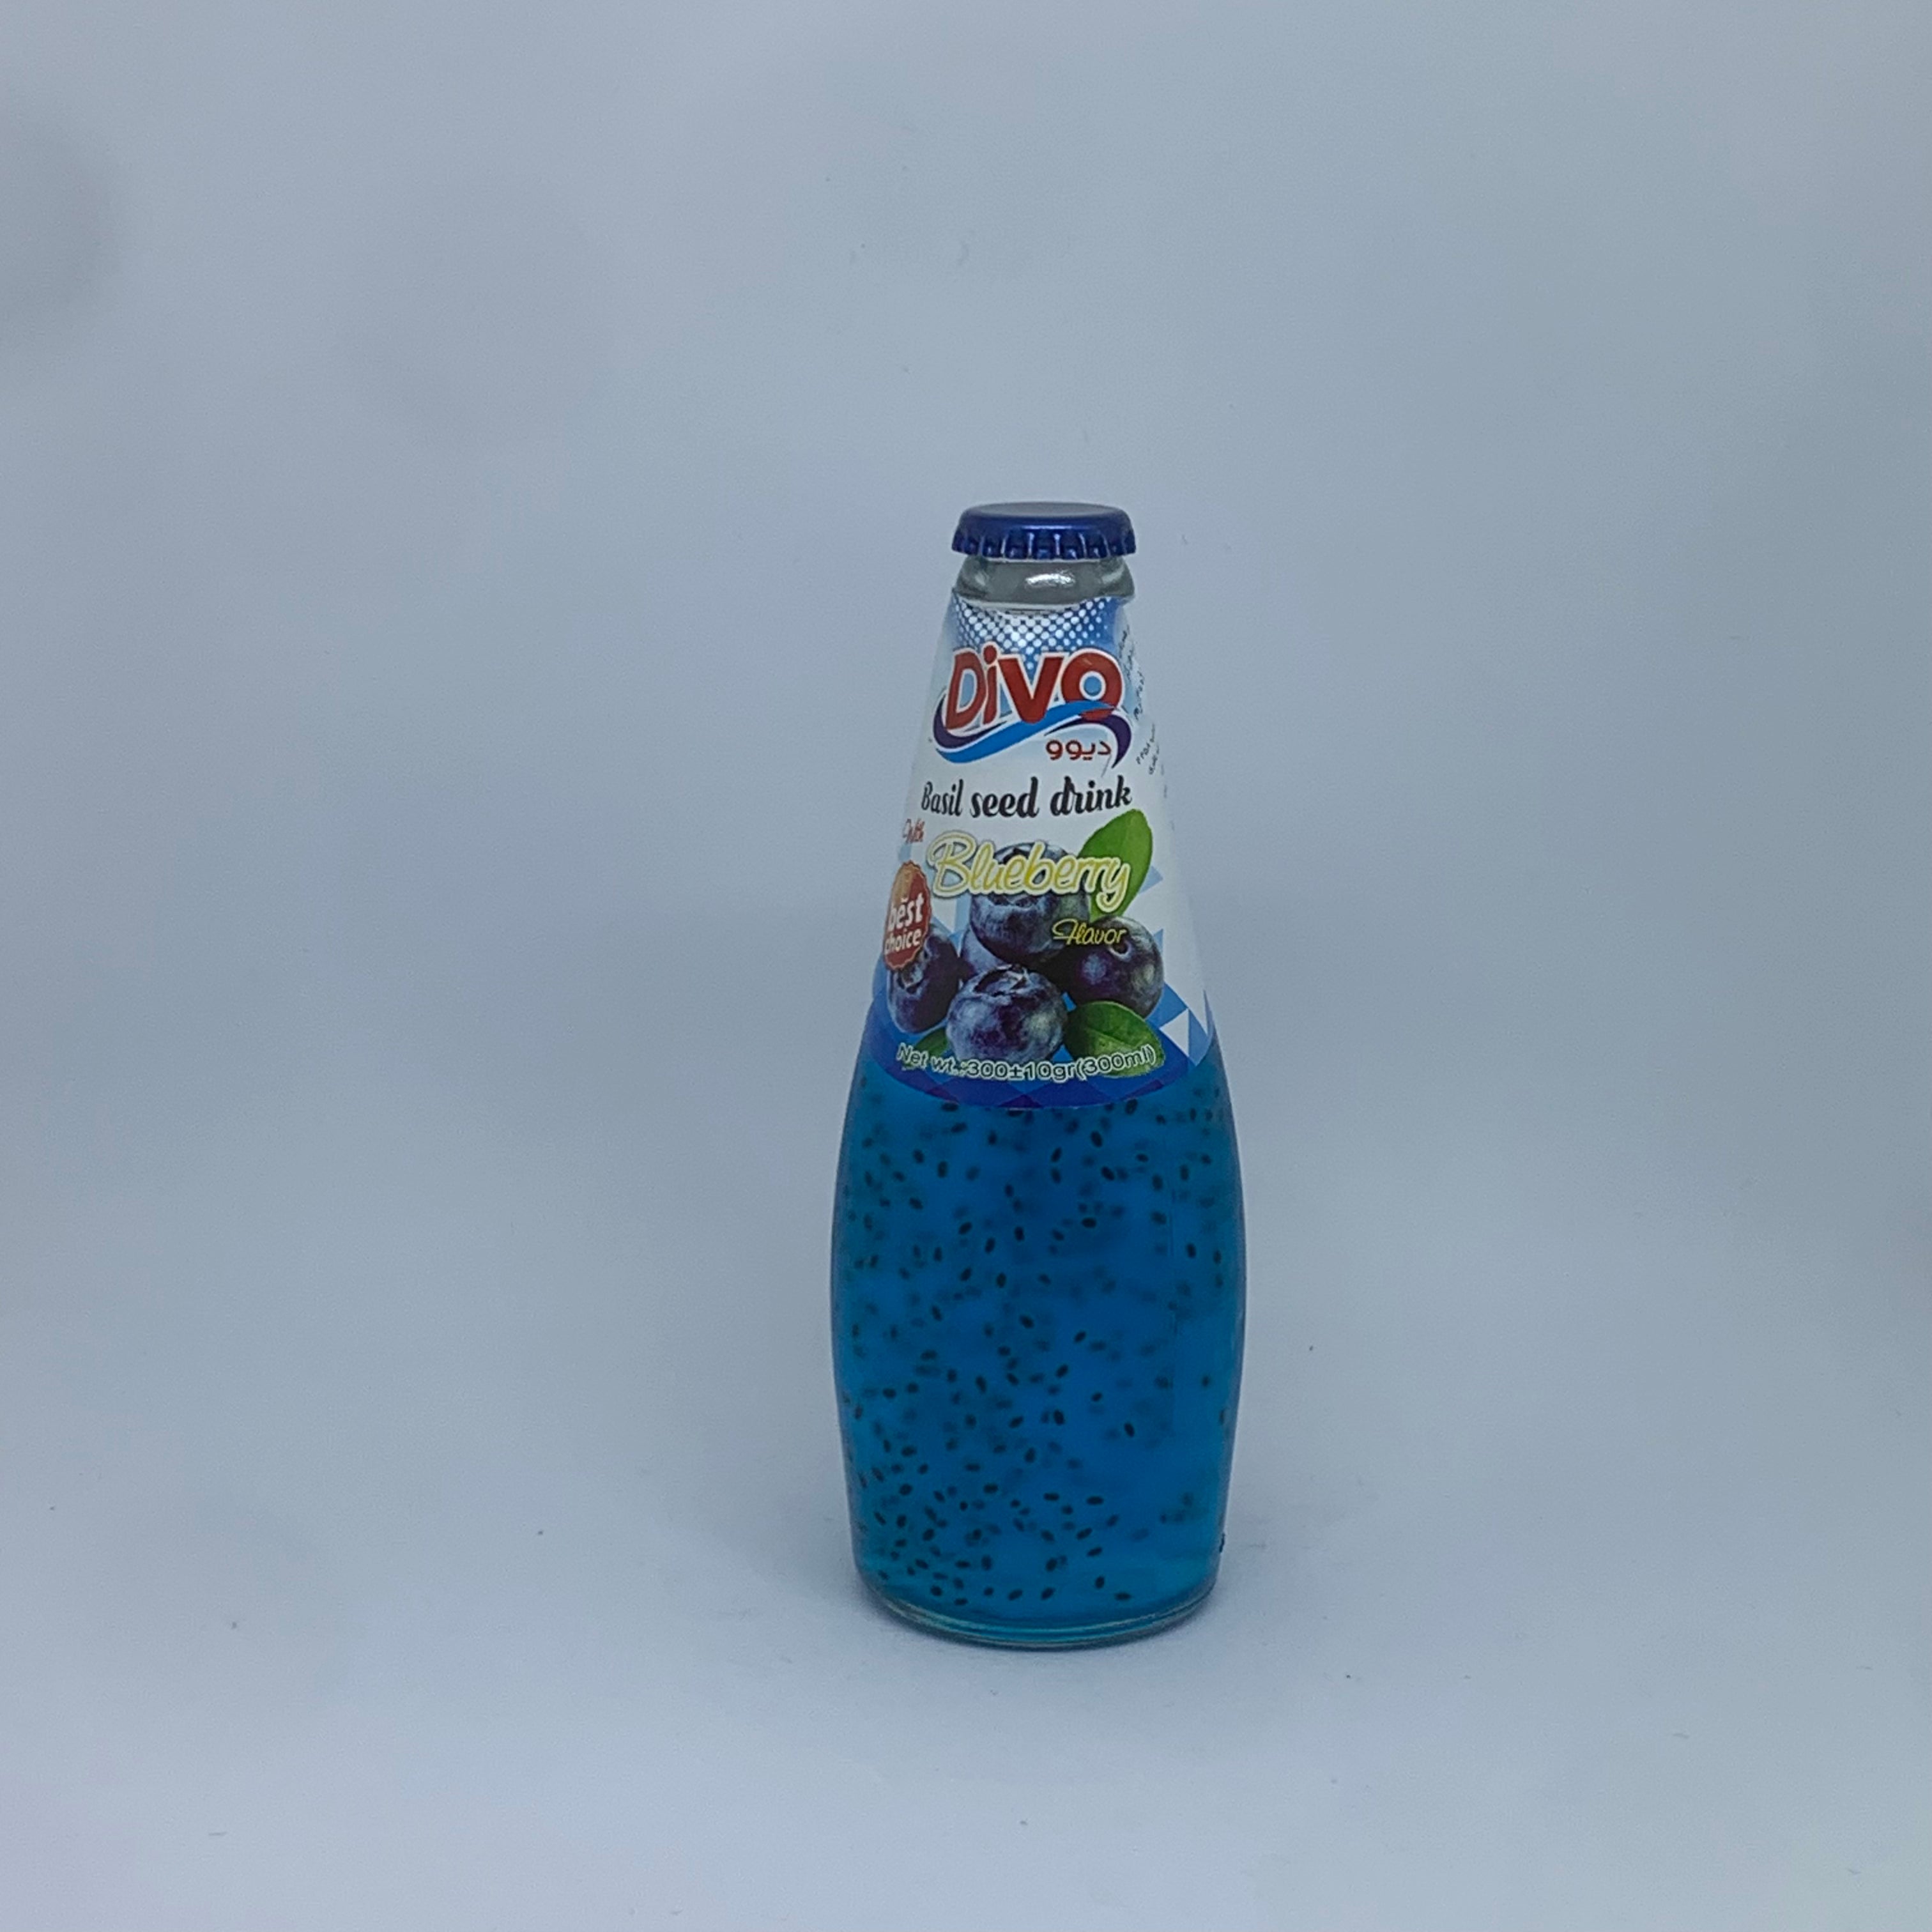 DIVO Blueberry Drink w/ Basil Seed 300mL